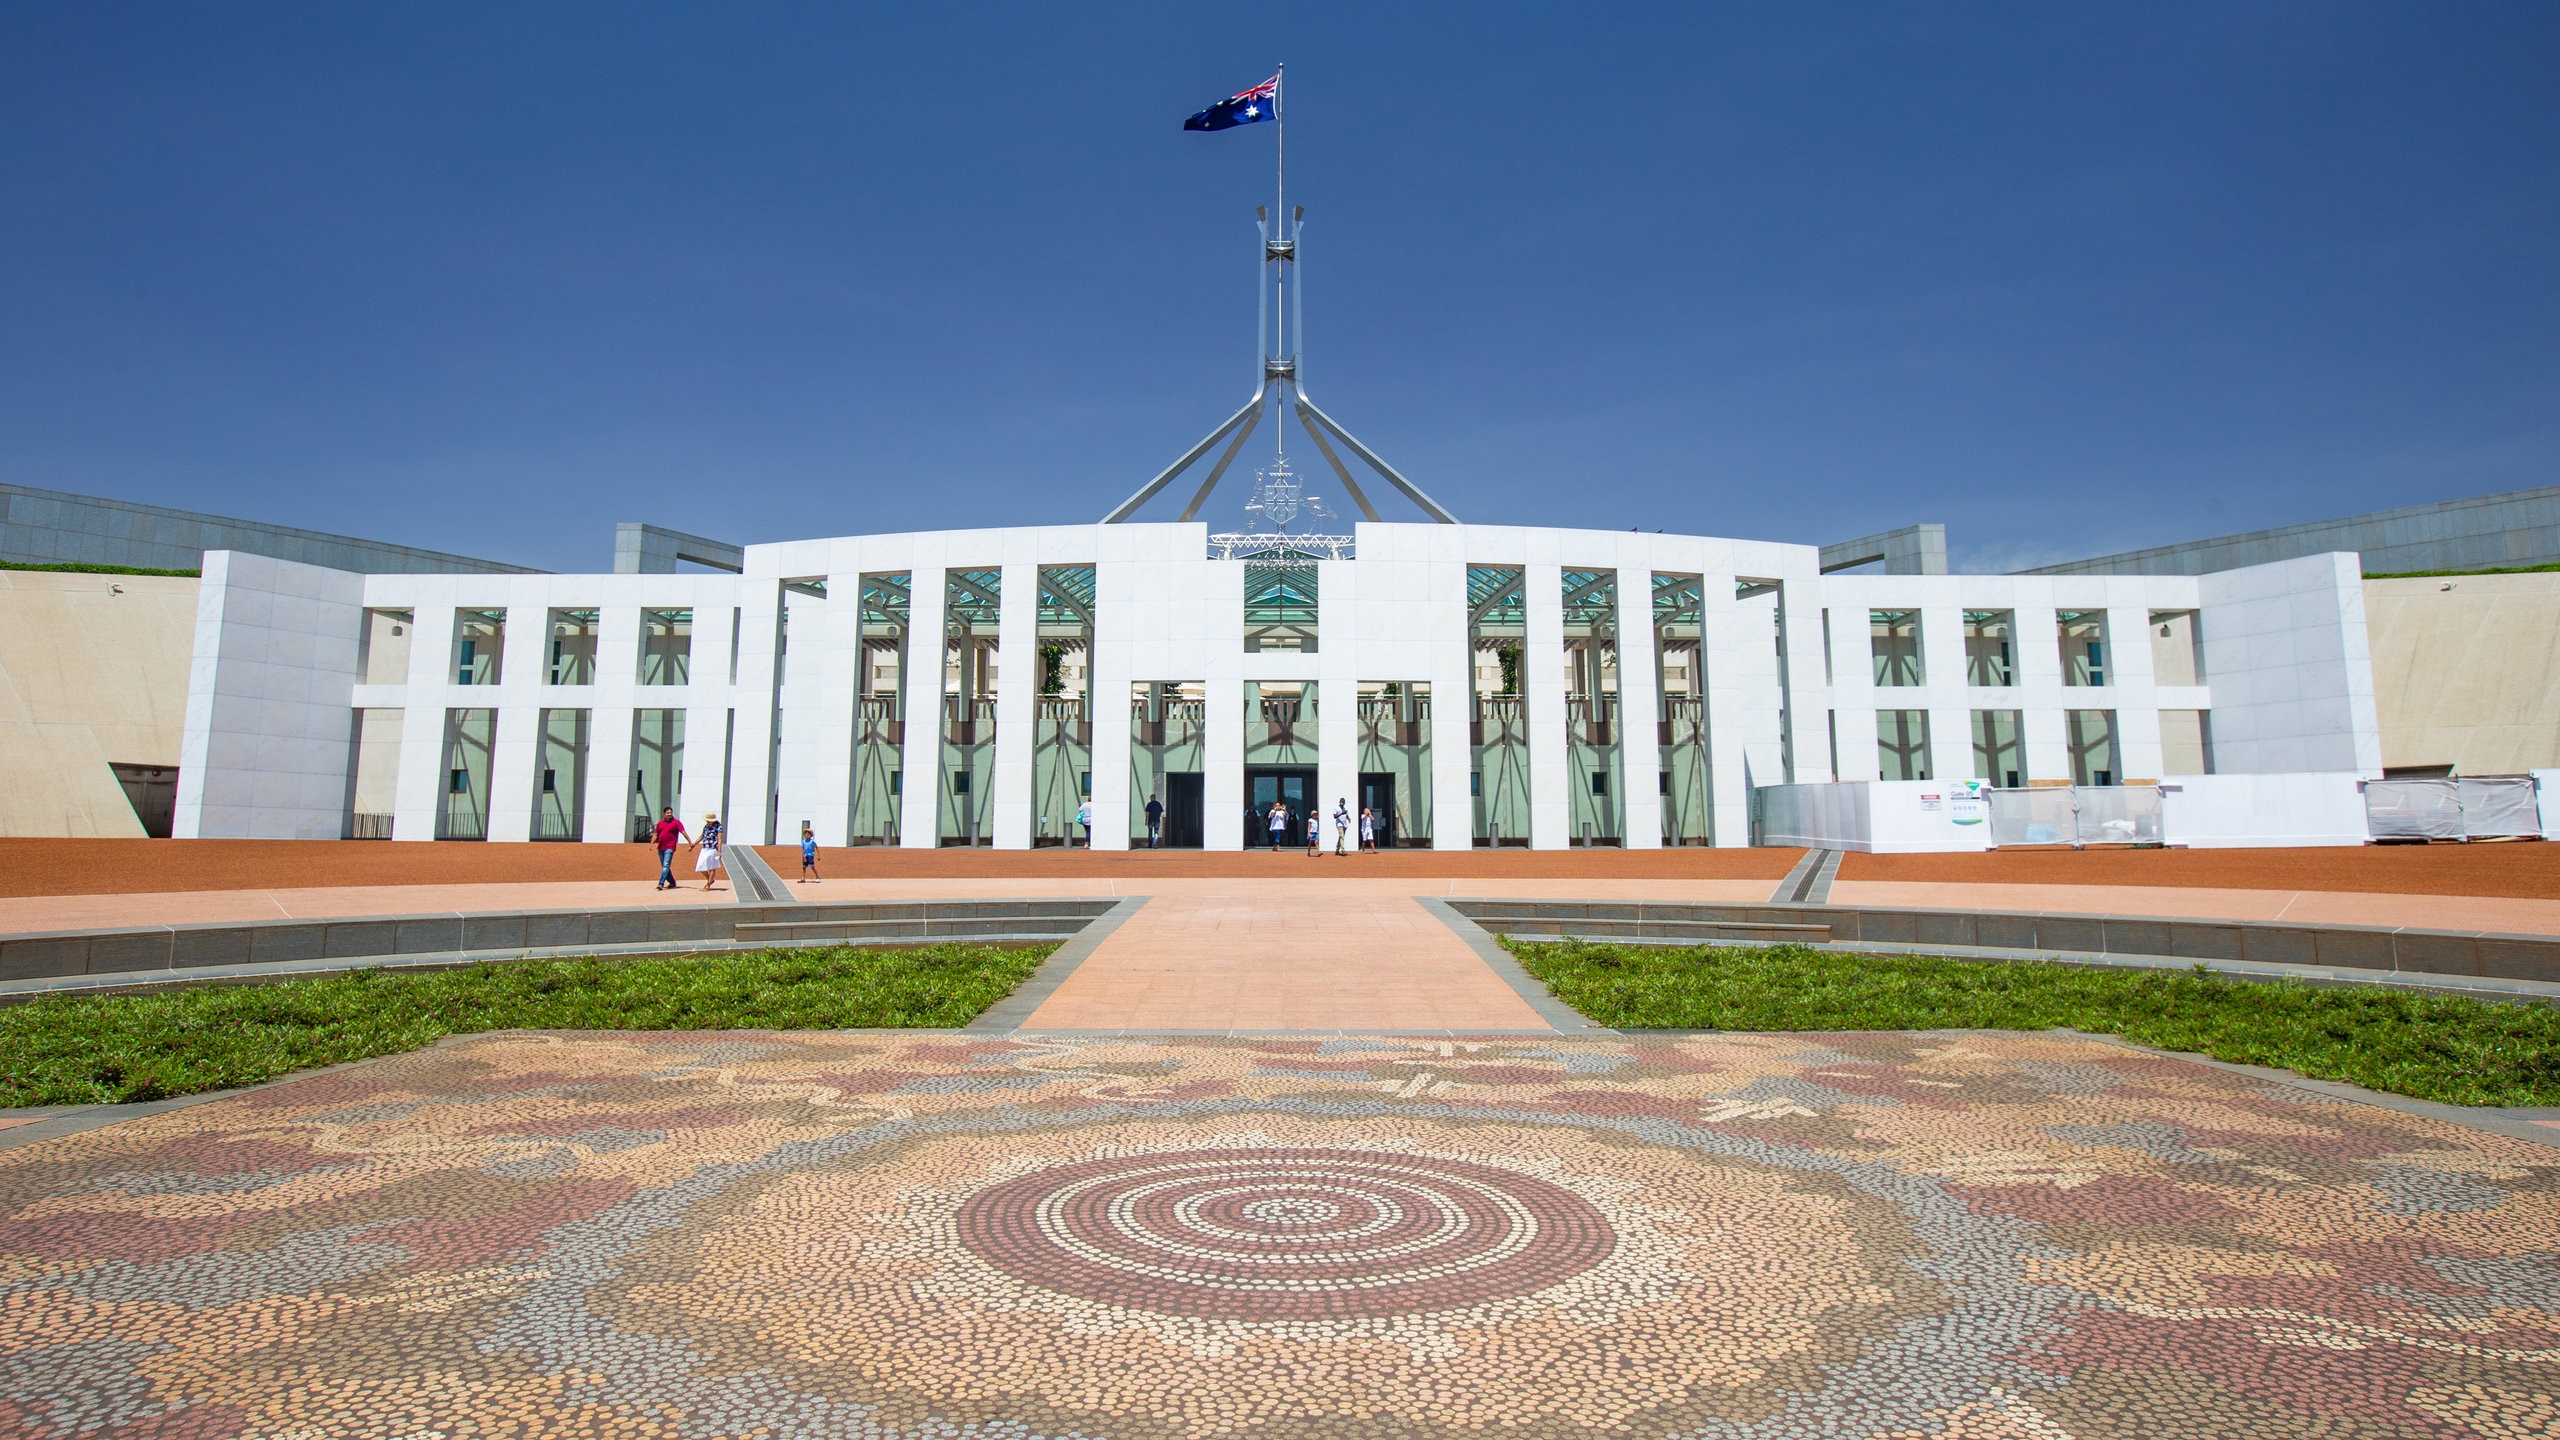 Canberra Parlament House Wallpapers